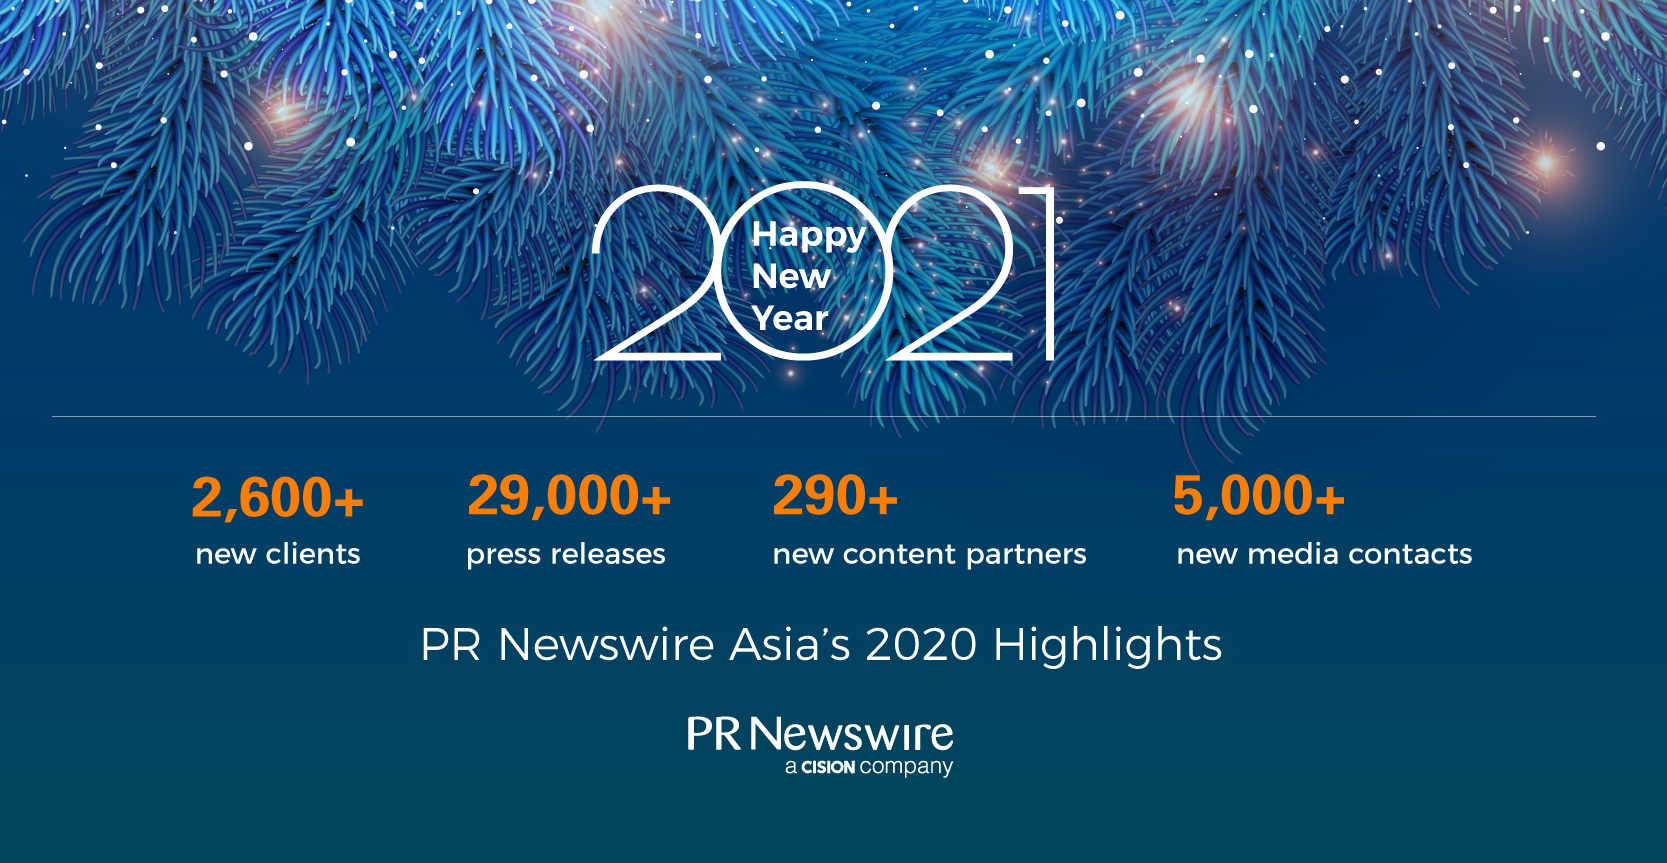 PR Newswire Asia’s Top Highlights of 2020